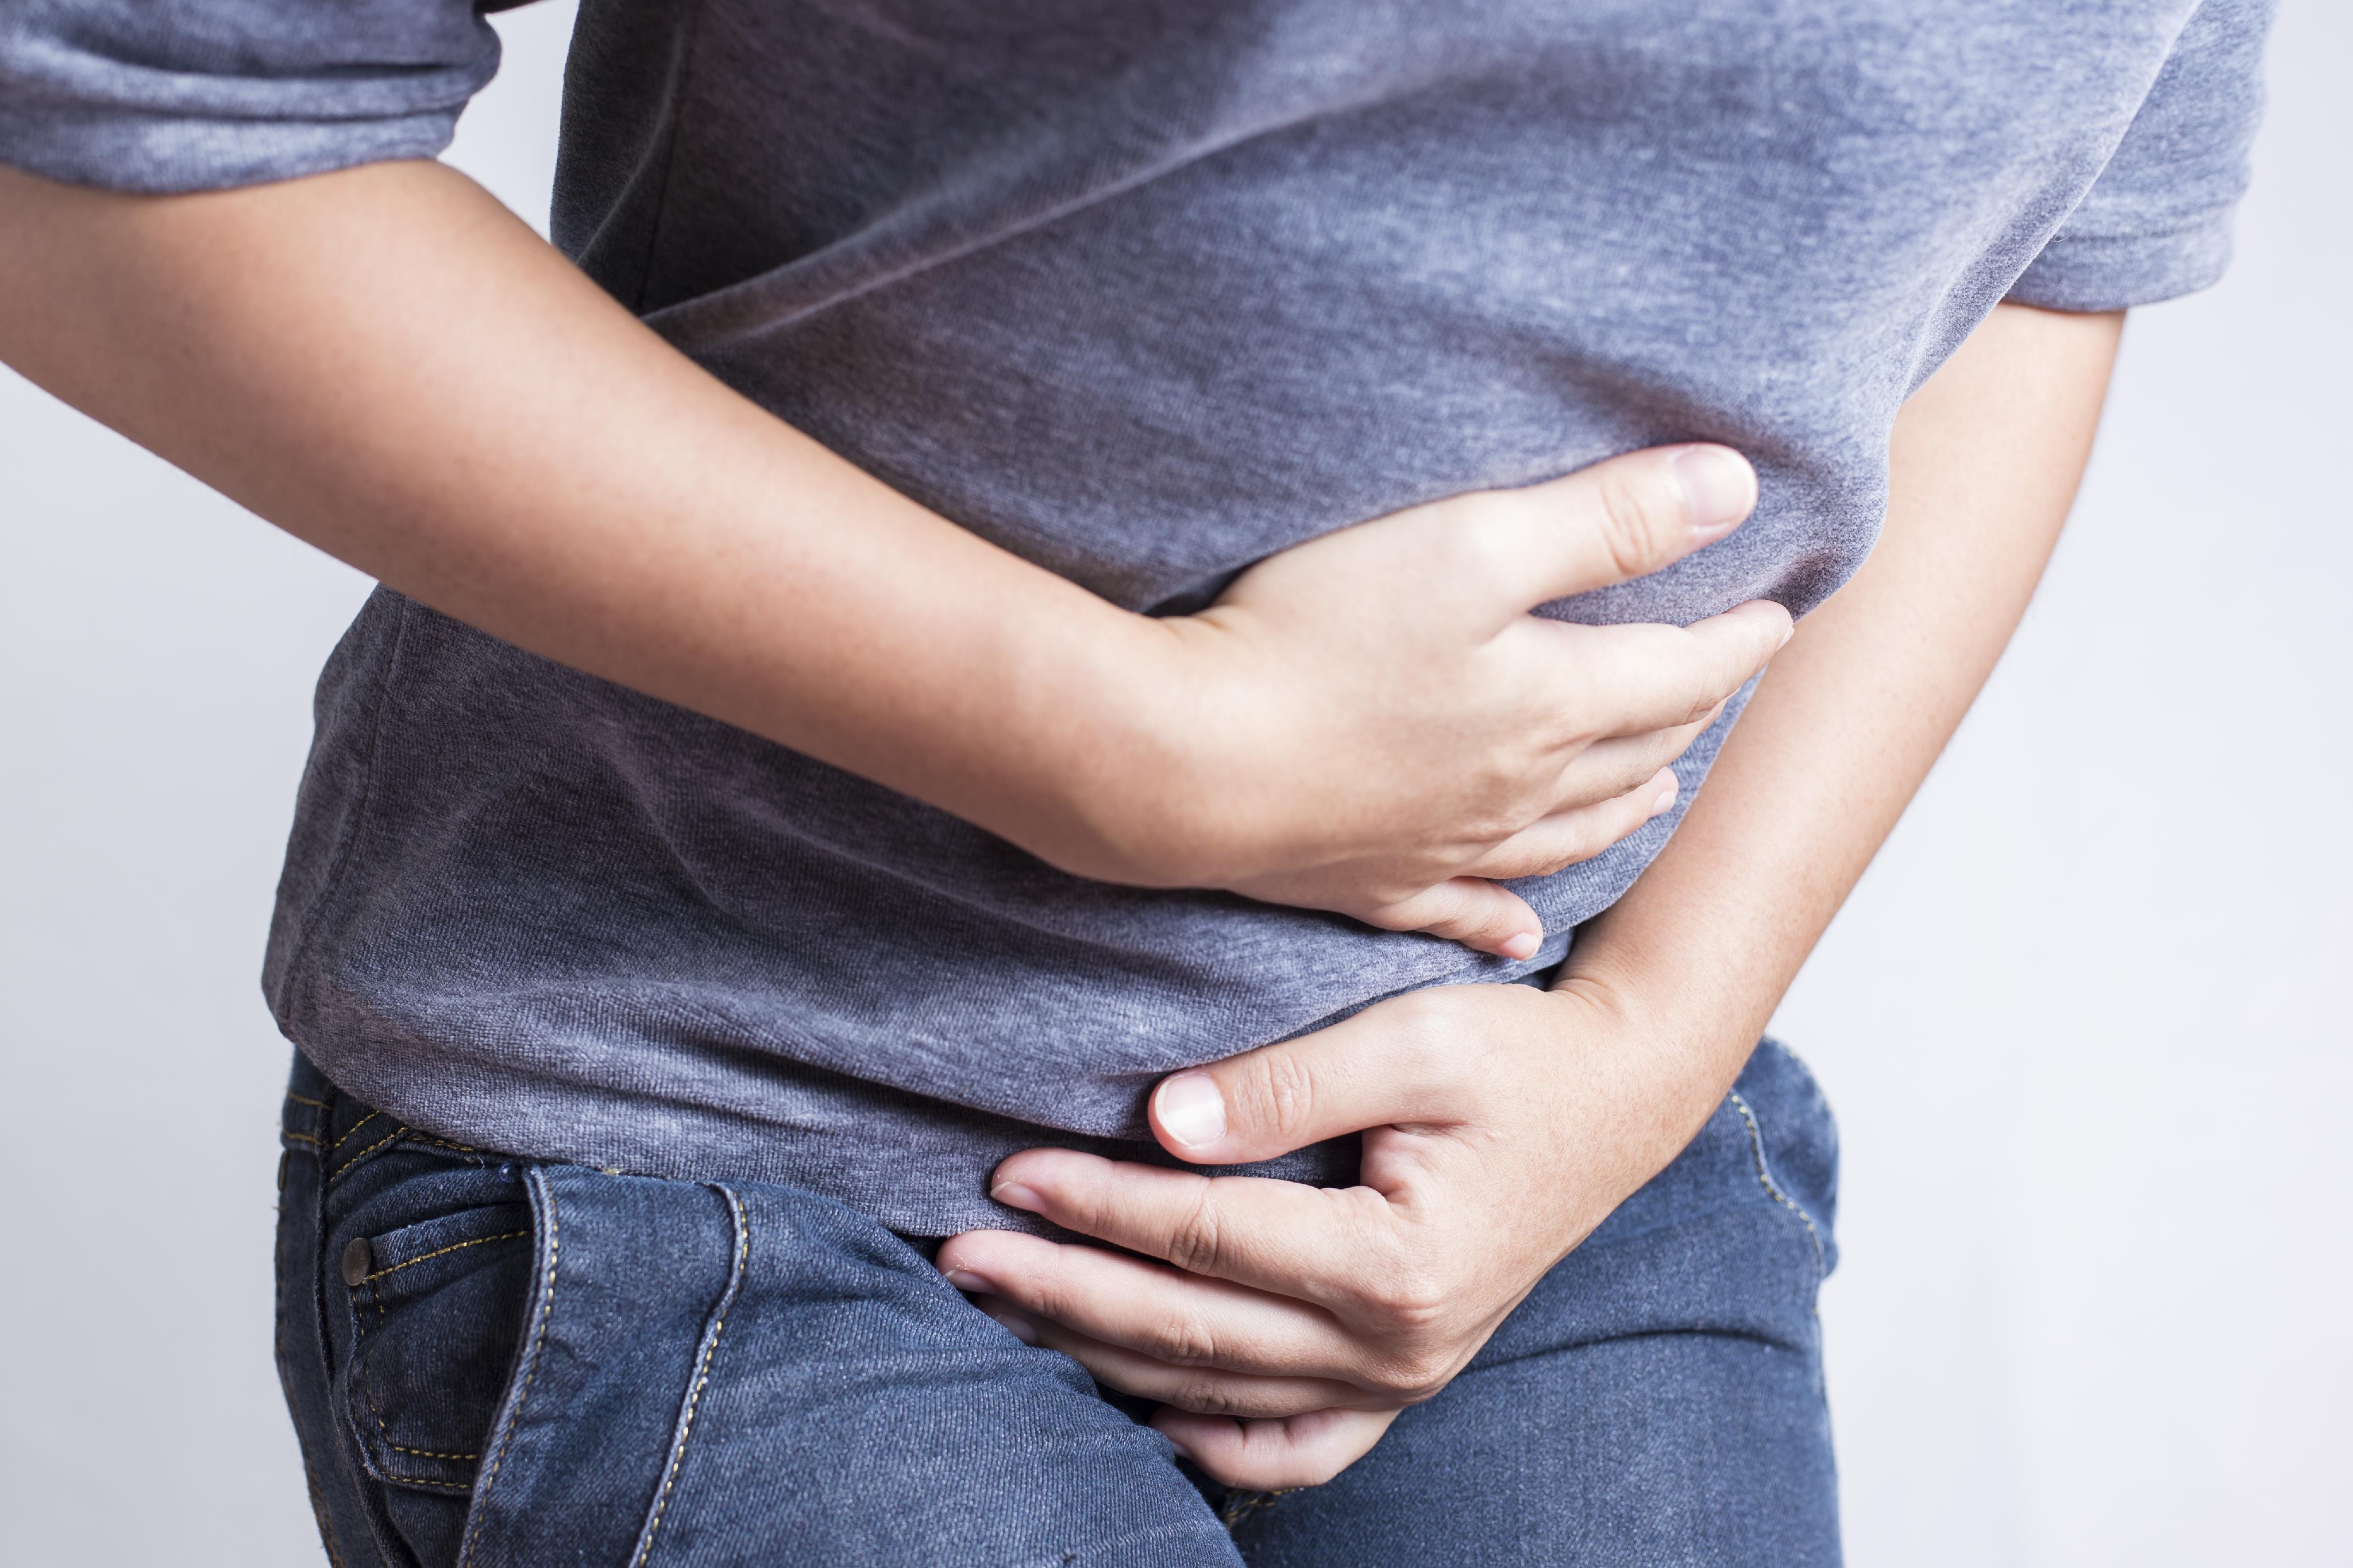 Urinary Tract Infection In Pregnancy: Know Causes, Symptoms and